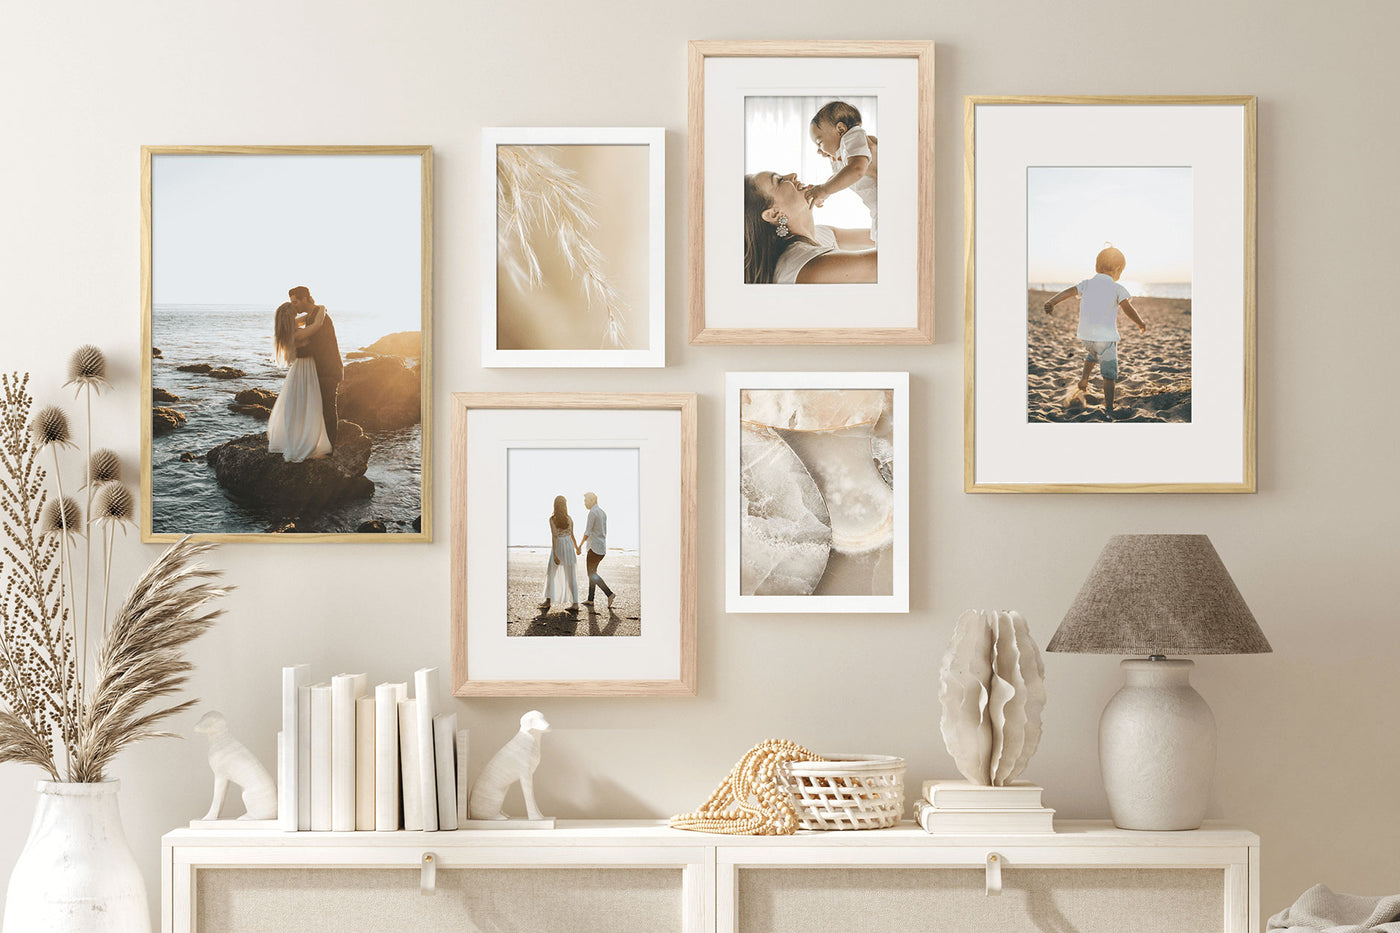 Picture wall of framed art